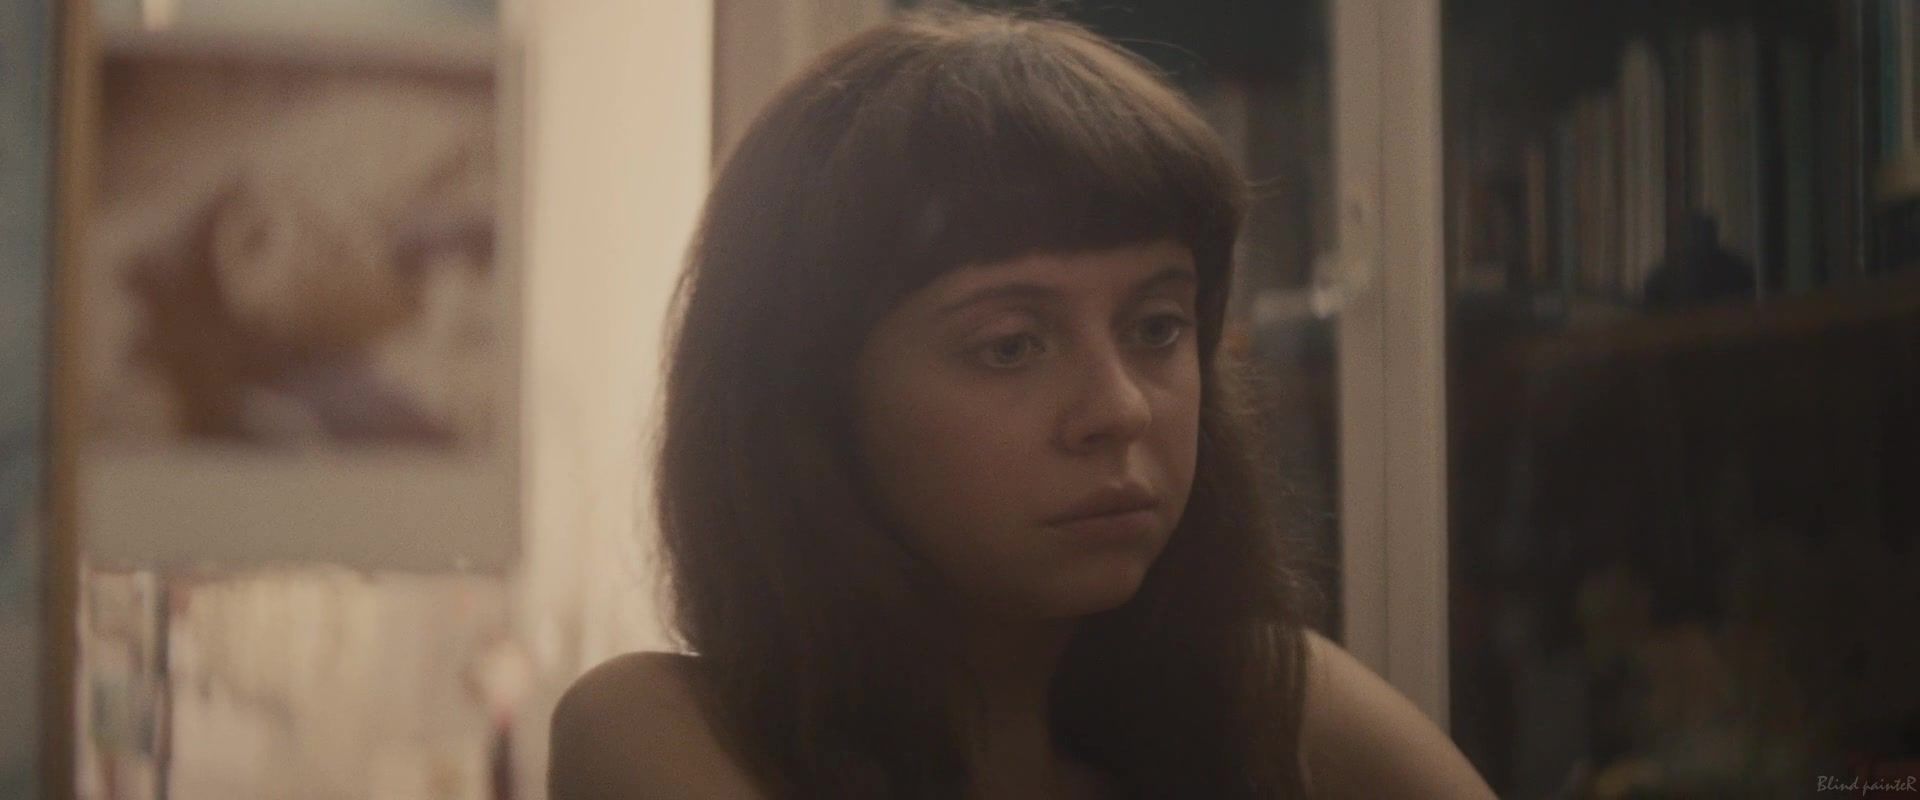 Nifty Full Frontal and sex video | Celebrity Bel Powley nude from the movie "The Diary Of A Teenage Girl" (2015) Naked Sex - 1